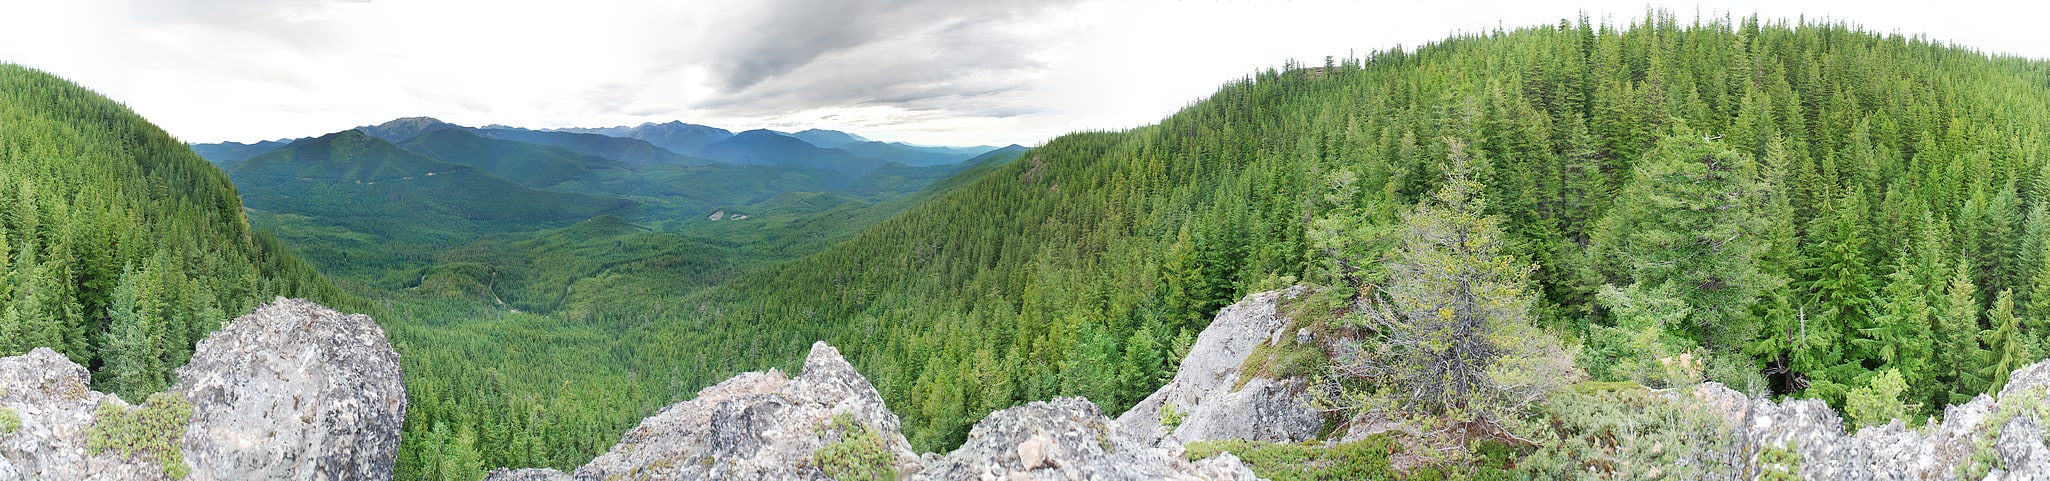 Olympic National Forest, Vereinigte Staaten